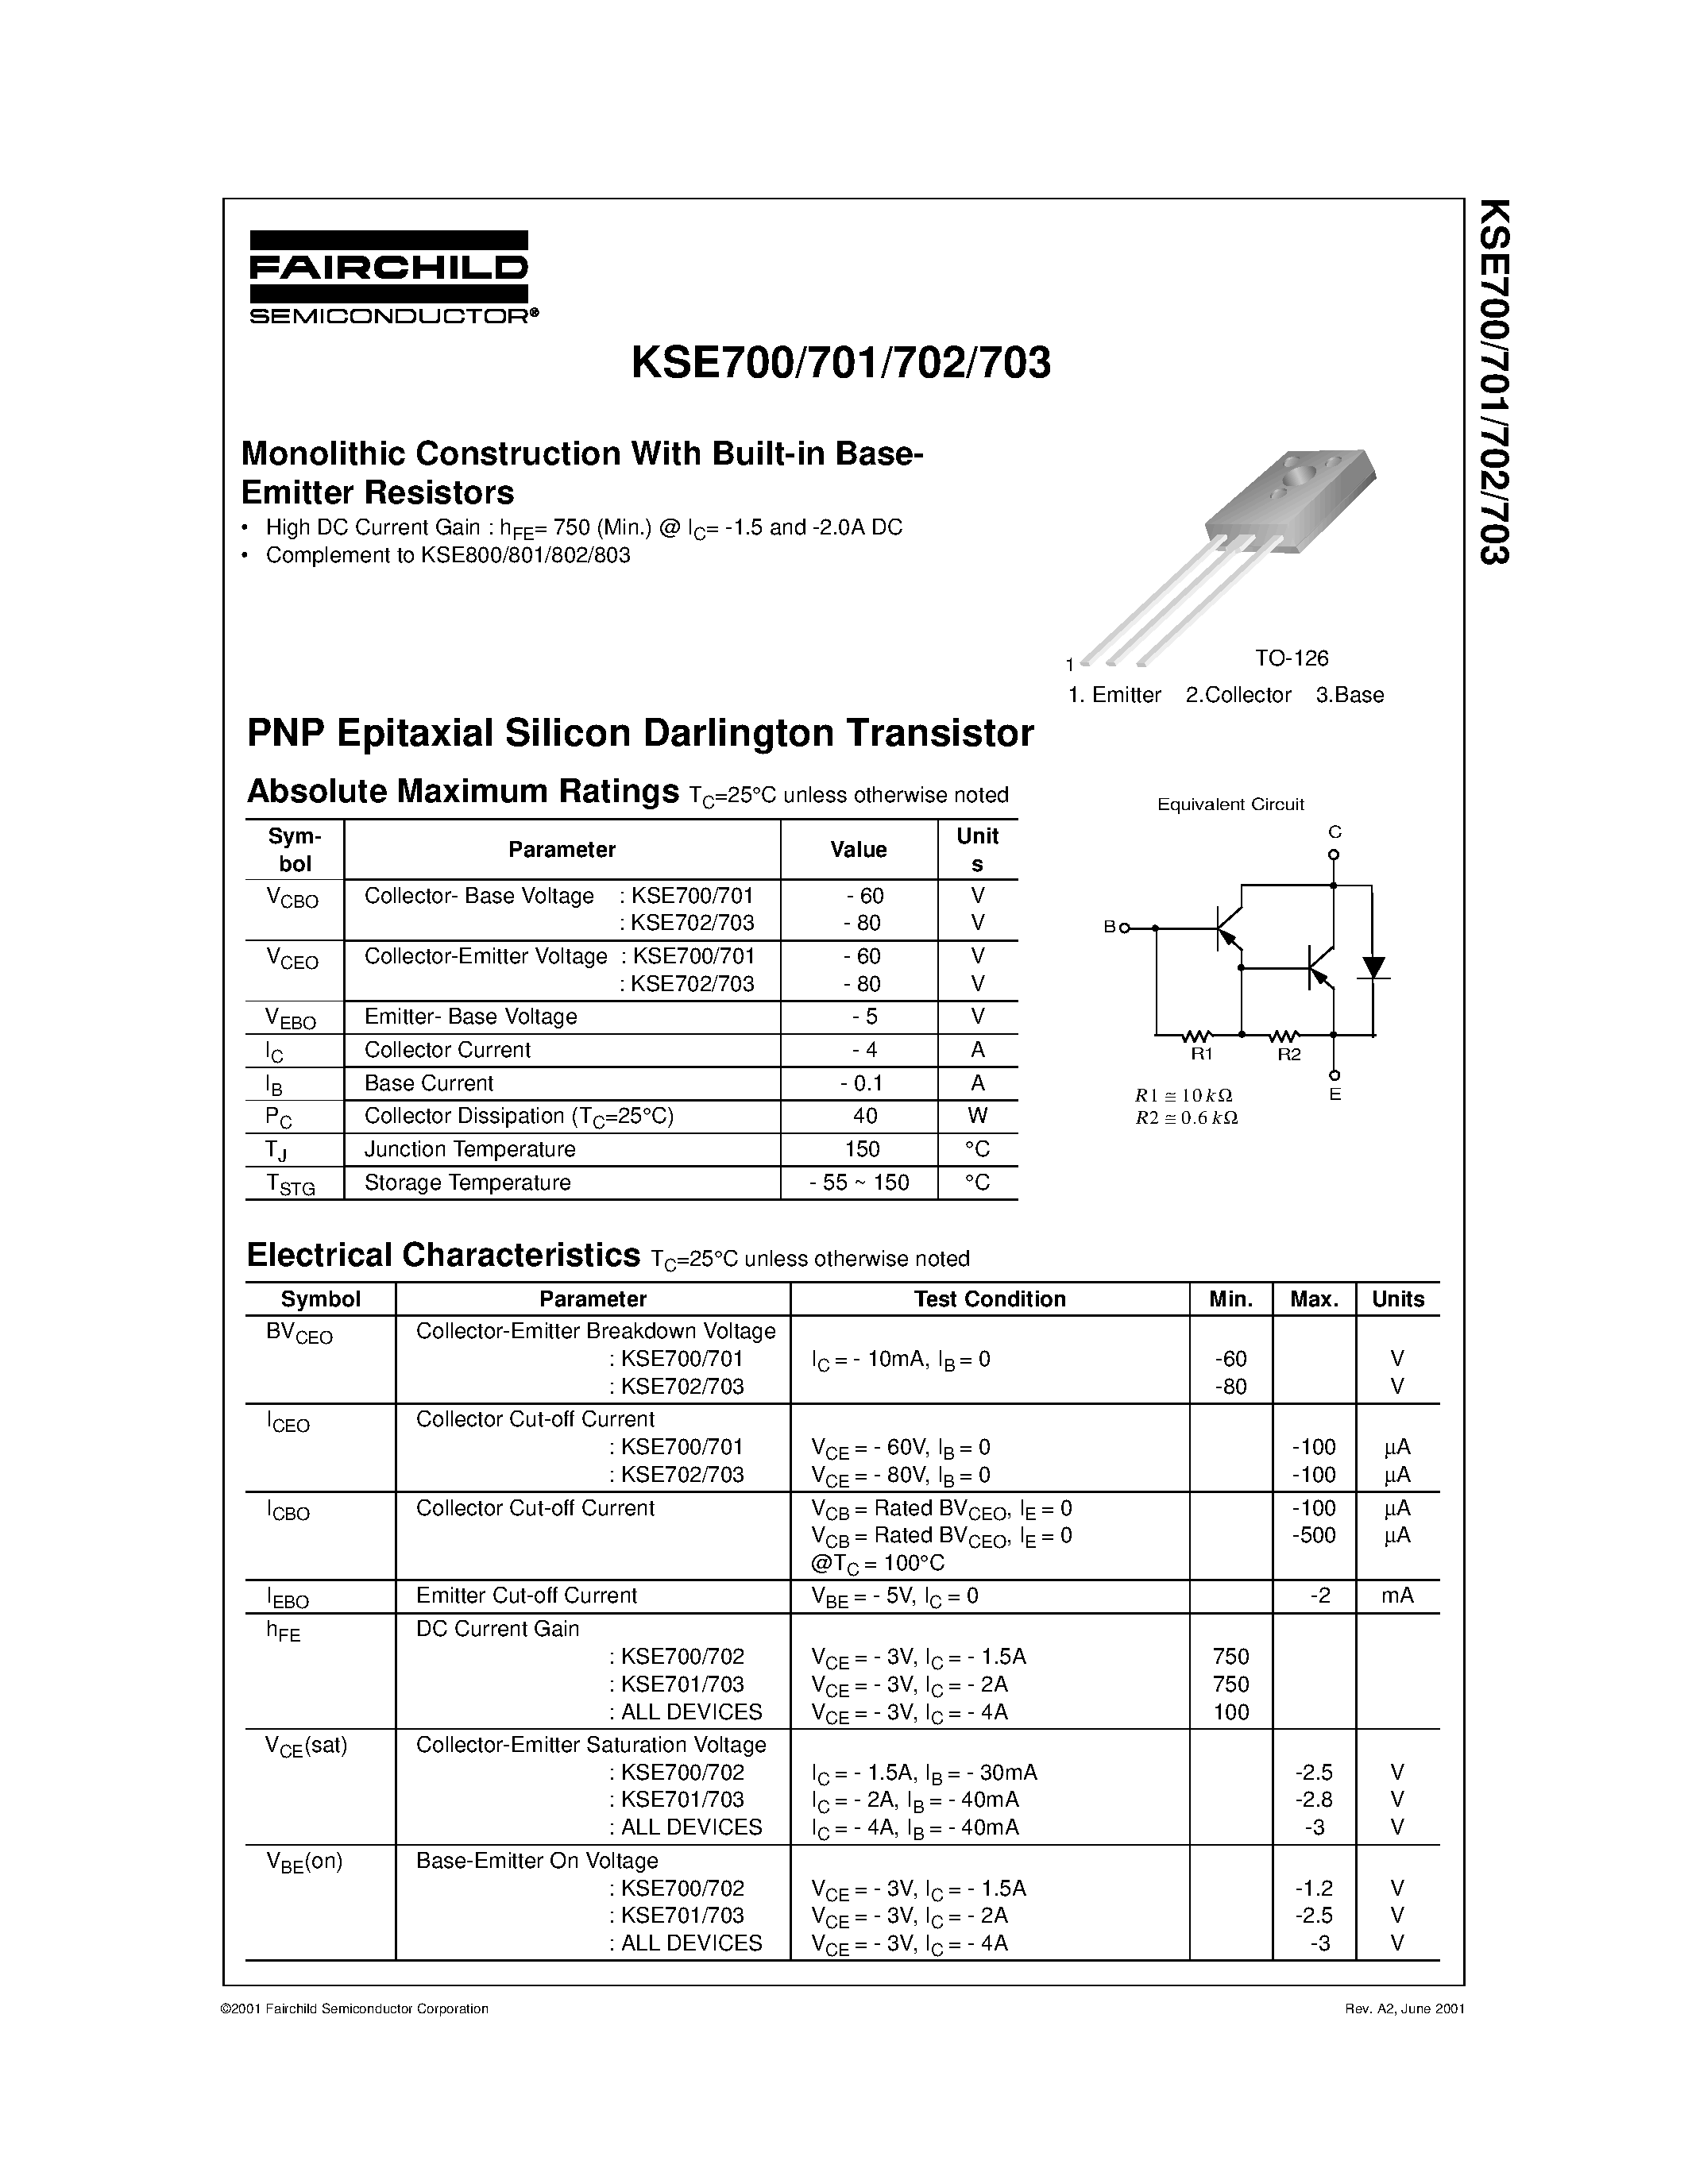 Datasheet KSE702 - Monolithic Construction With Built-in Base- Emitter Resistors page 1